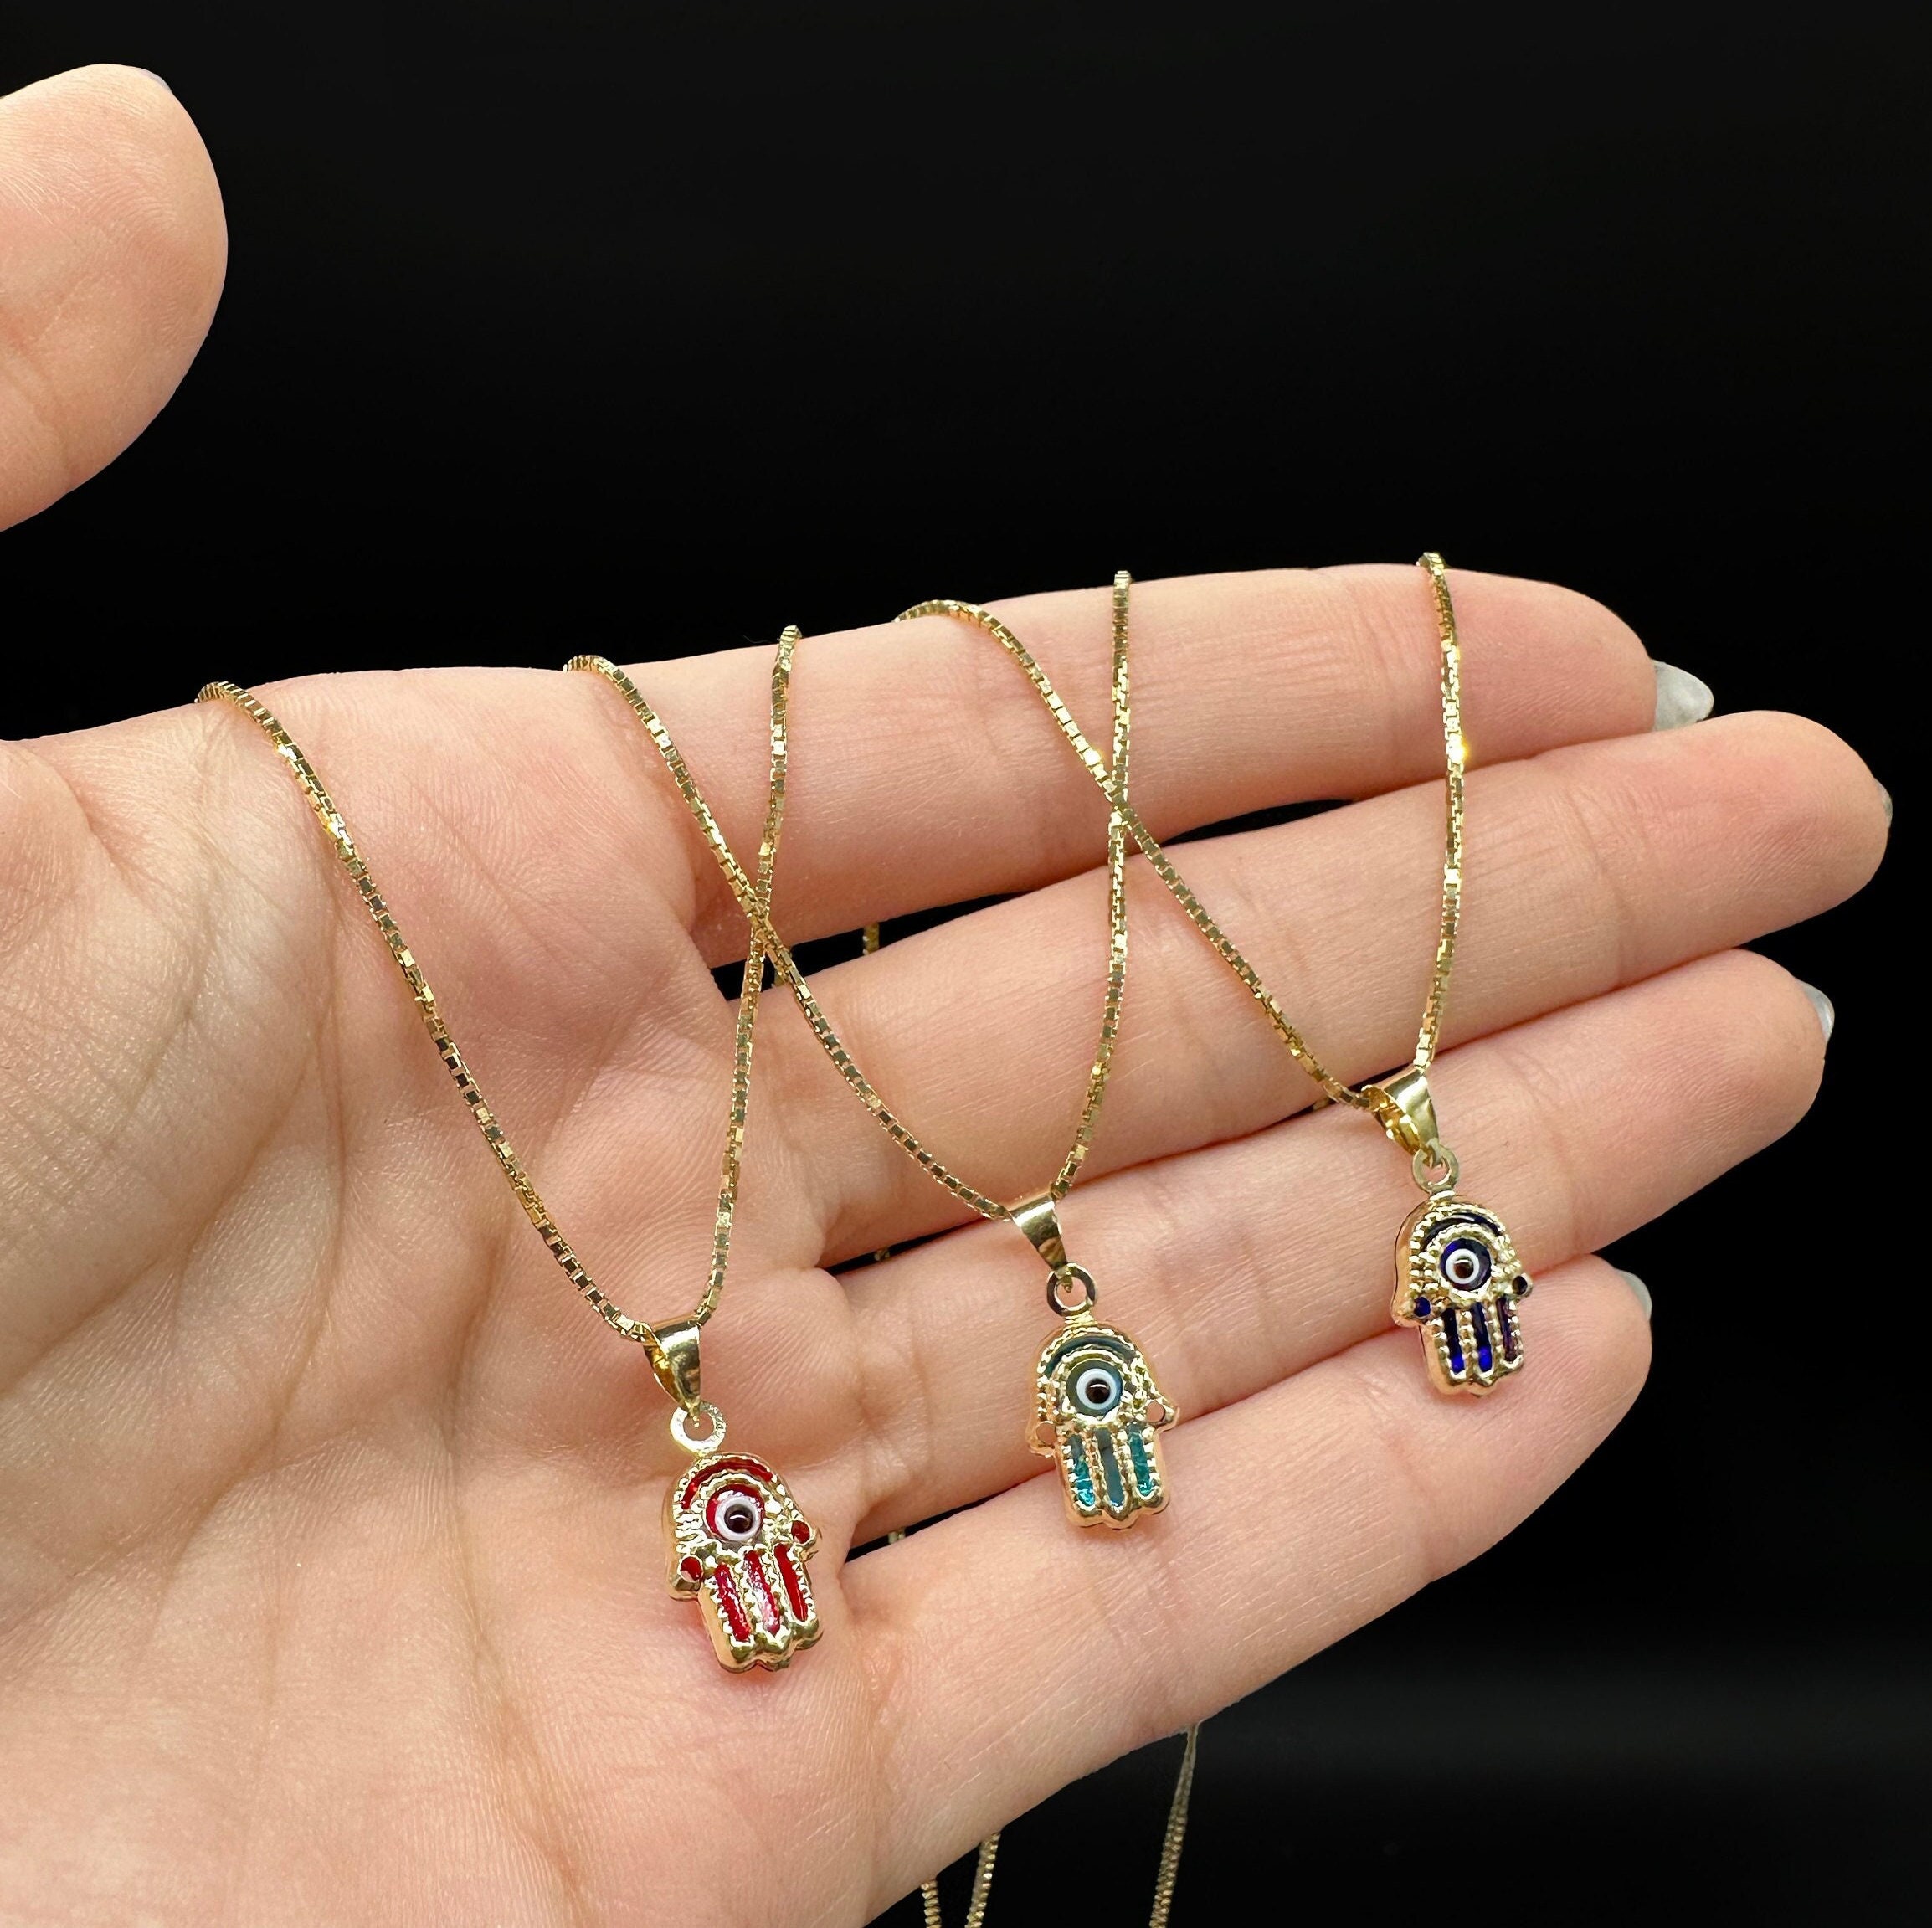 Hamsa Pendant with 14K Gold Filled Rope Necklace 4mm 24 Chain Set for – JB  Jewelry BLVD